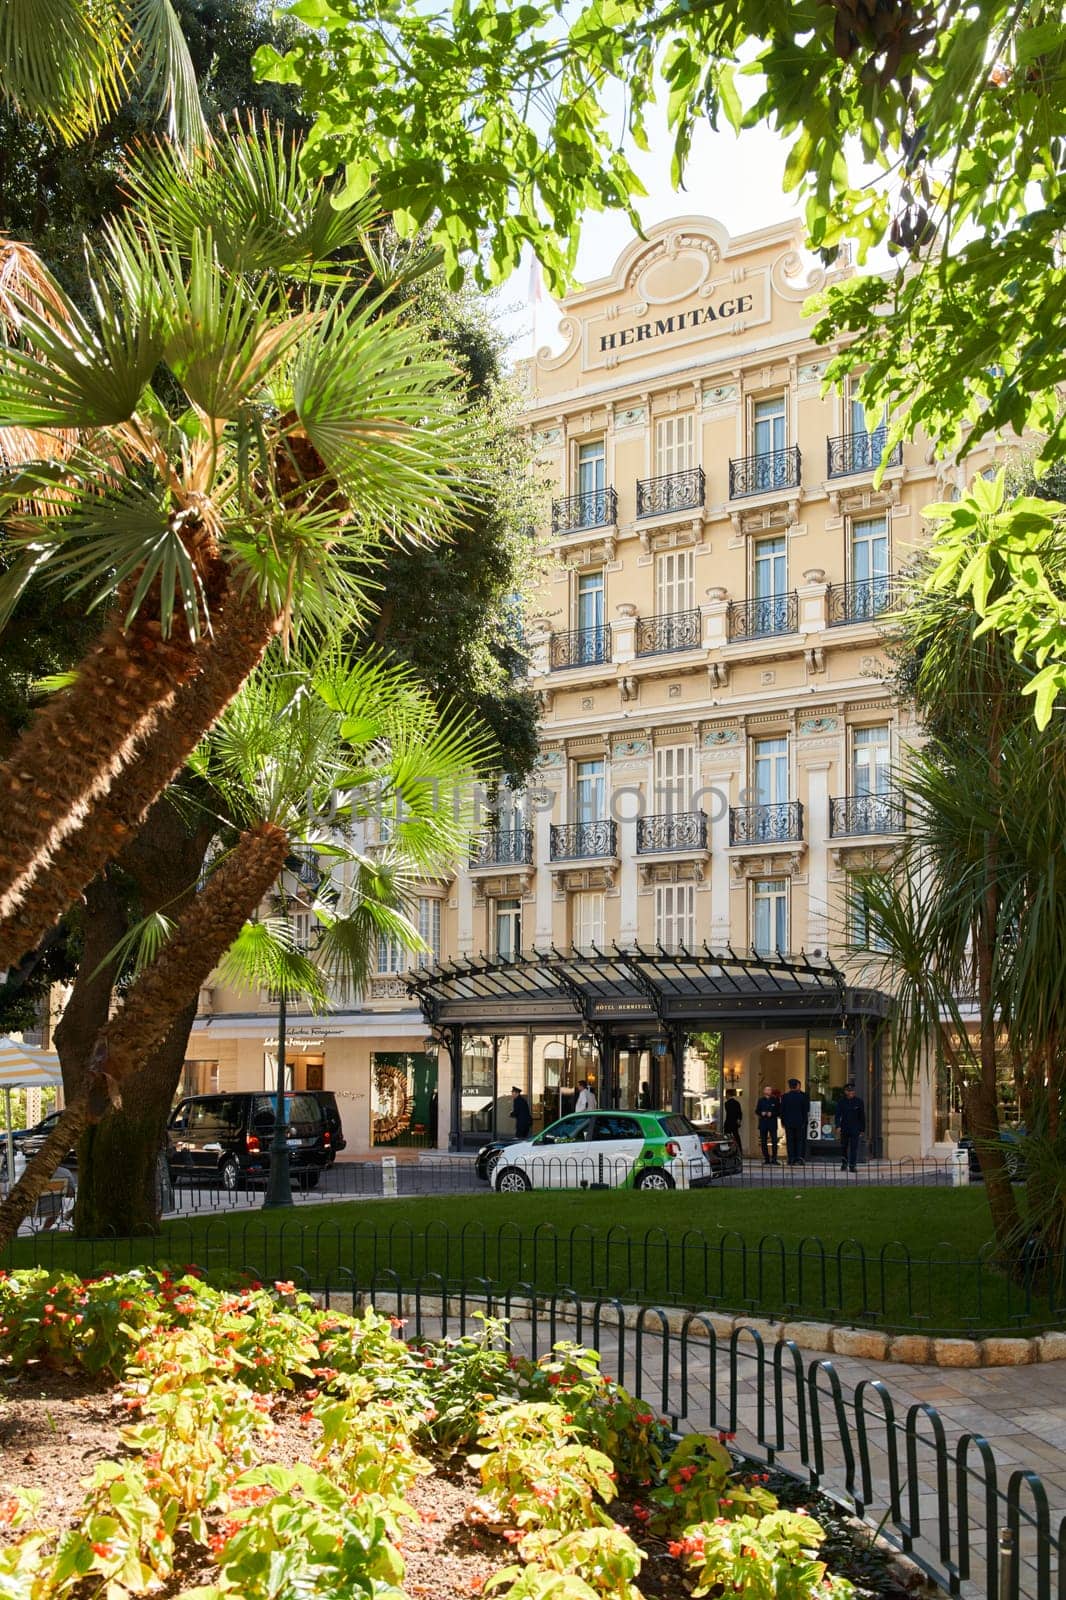 Monaco, Monte-Carlo, 09 November 2022, The Hotel Hermitage through flowers at sunny day, luxury life, building exterior of famous hotel, palm trees, sunshine, balcony. High quality photo